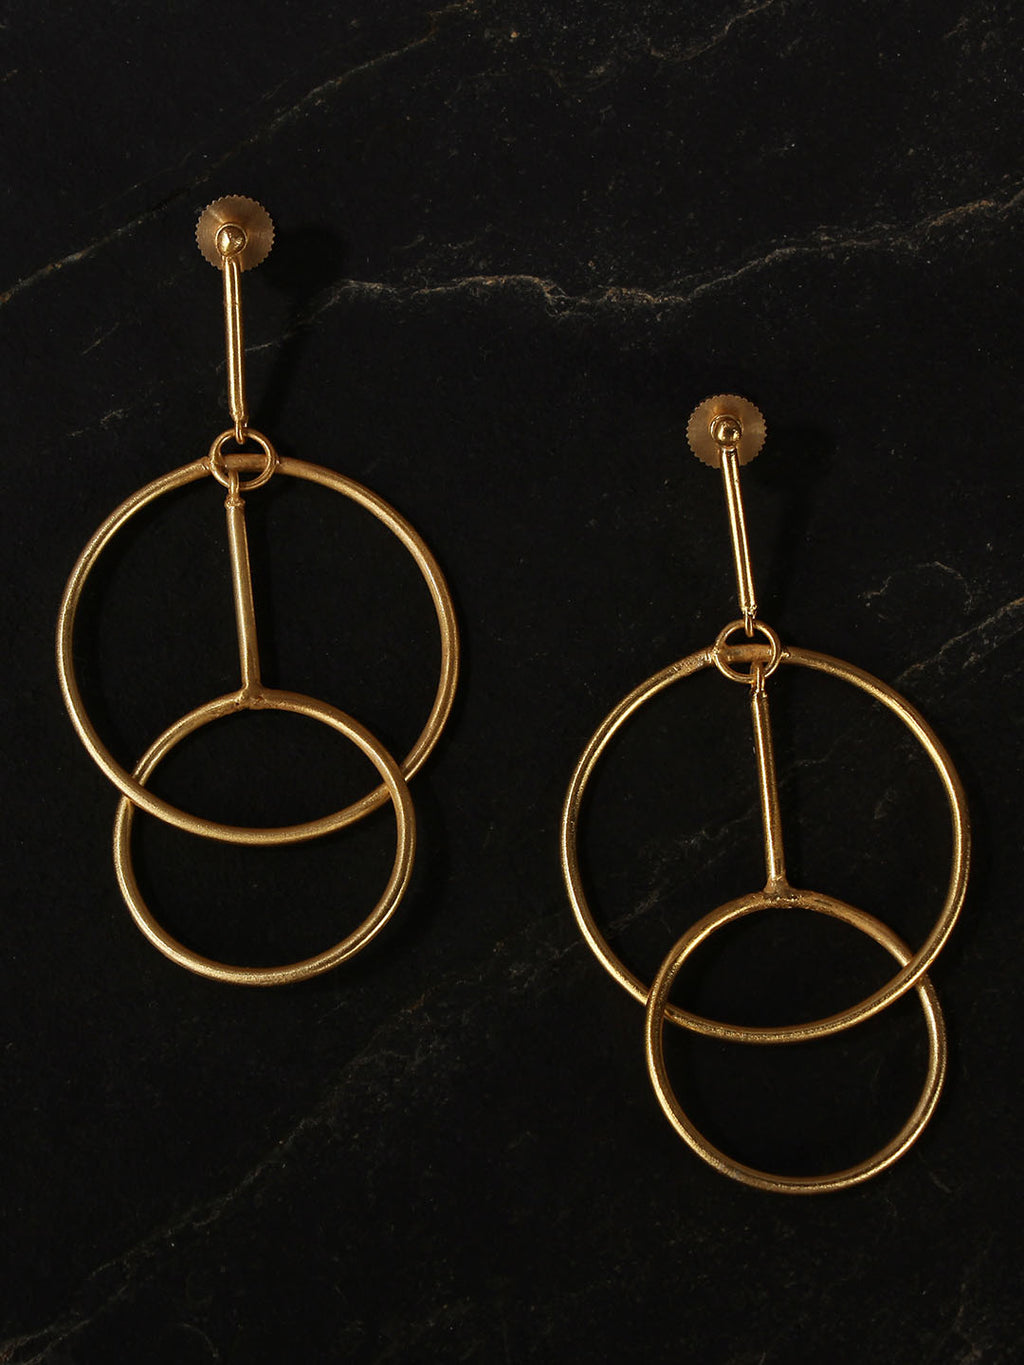 Gold Plated Concentric Circle Danglers, Earrings - Shopberserk